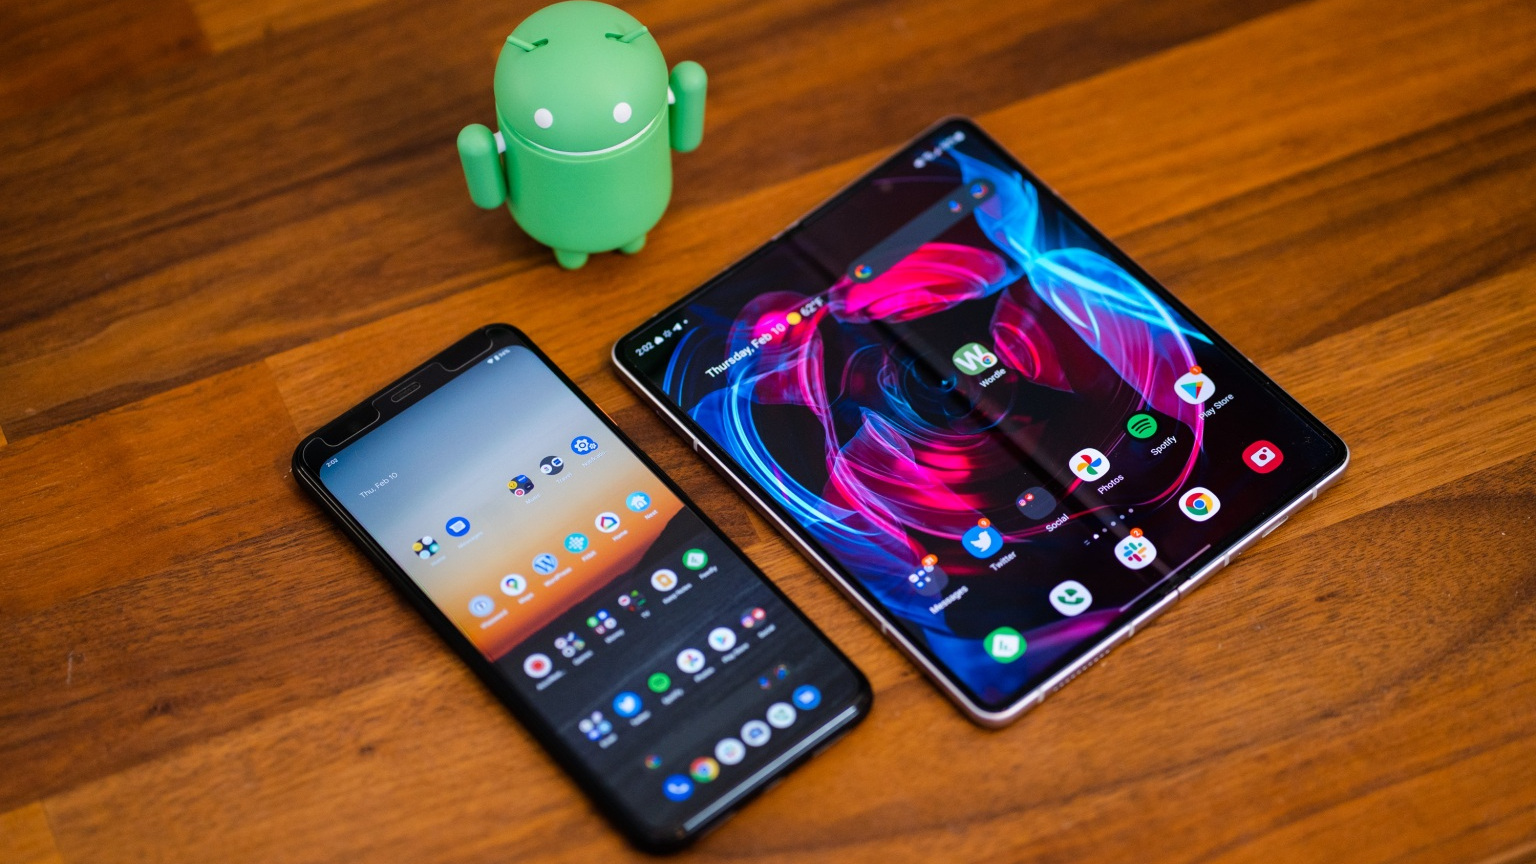 A Google Pixel 4 XL running on Android 13 next to a Samsung Galaxy Z Fold 3, showing the Android 13's tablet-style interface